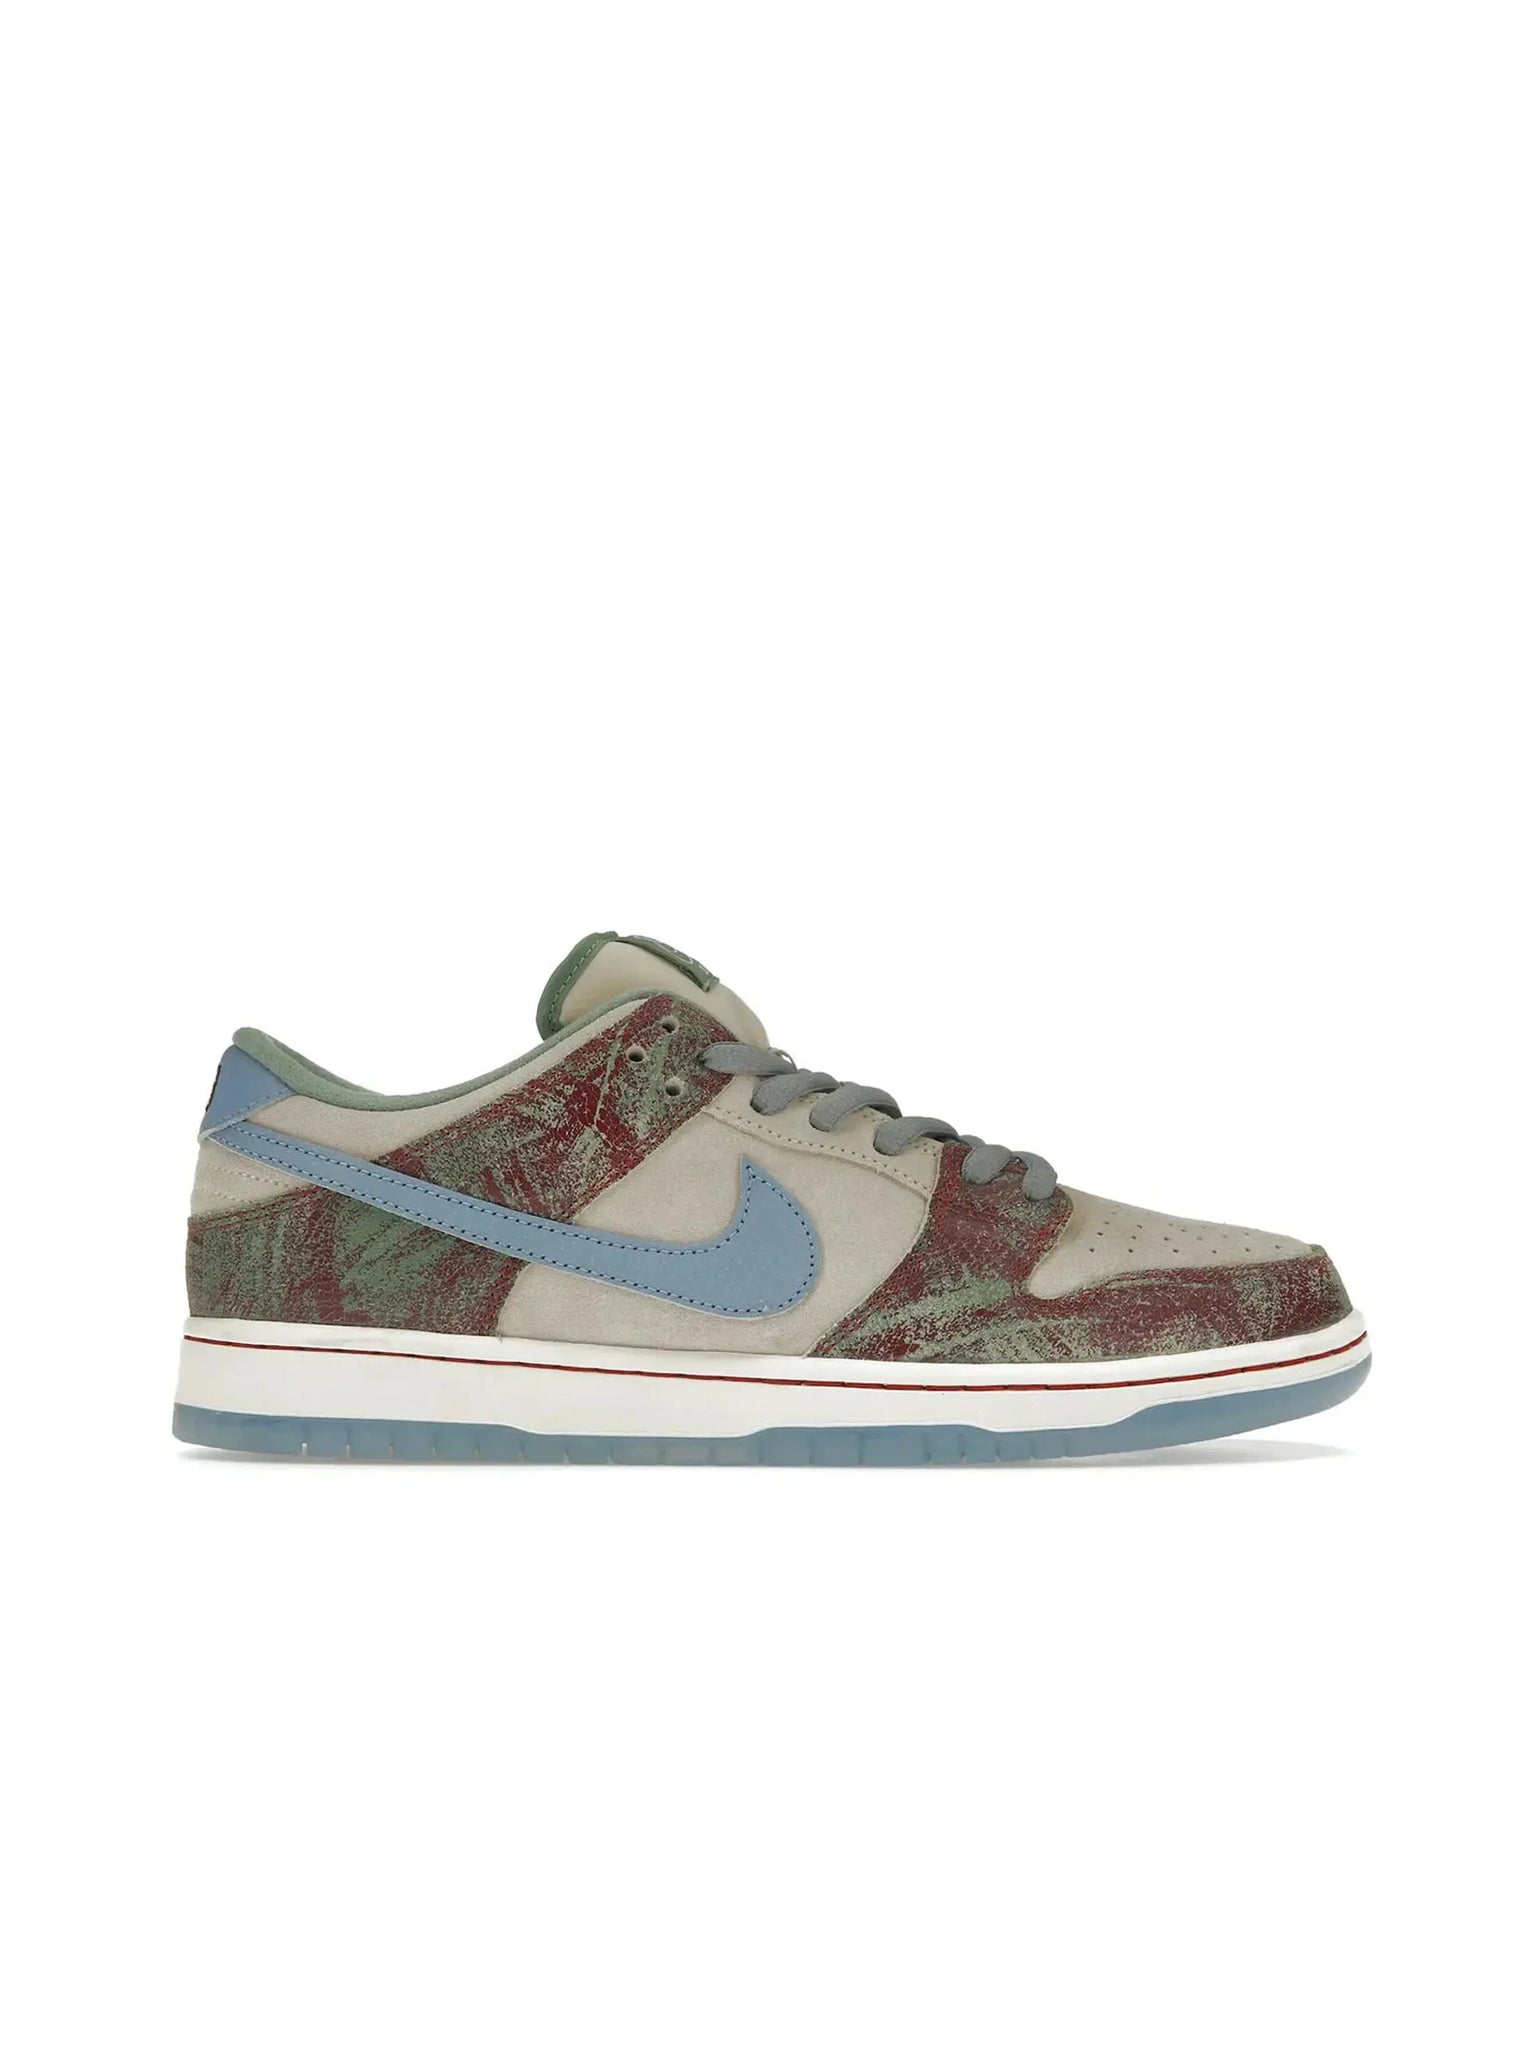 Nike SB Dunk Low Crenshaw Skate Club in Auckland, New Zealand - Shop name